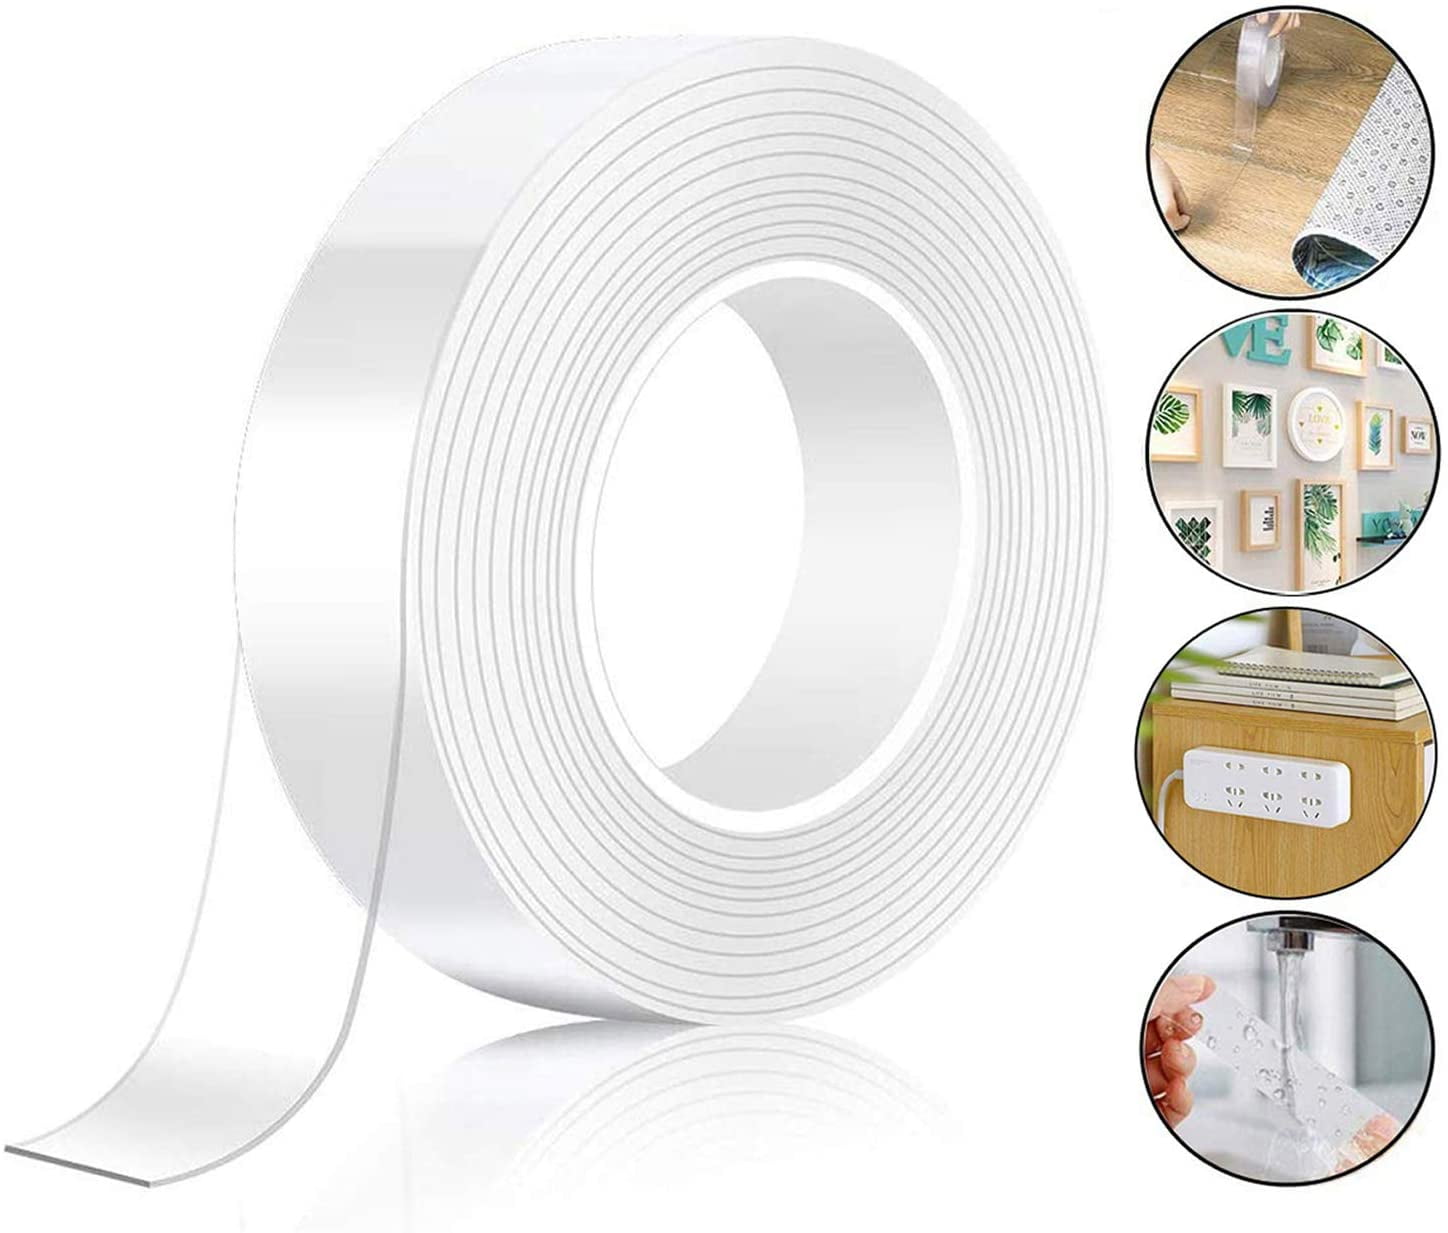 5m*3cm*2mm Tape Made Multi-Function Traceless Double Sided Adhesive Tape Grip Washable Reusable Nano-Free Tape Magic Tape No Trace of Washable Tape 